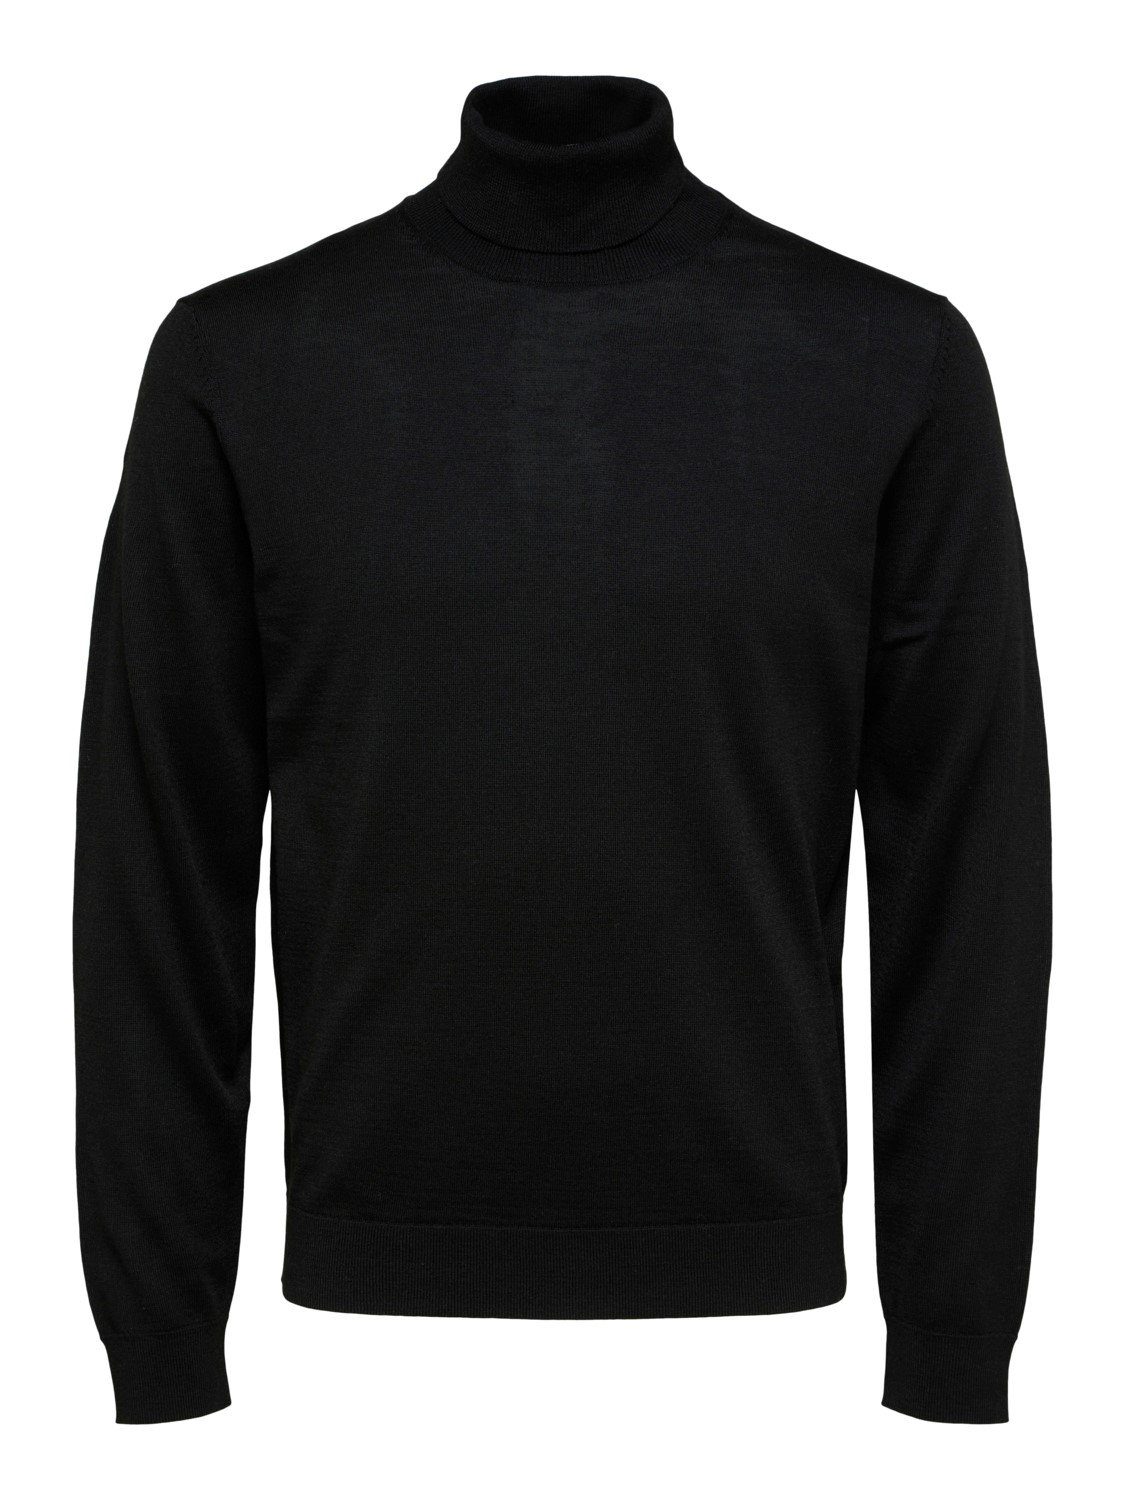 SELECTED HOMME Strickpullover SLHTOWN MERINO COOLMAX aus Wollmix Black 16084840